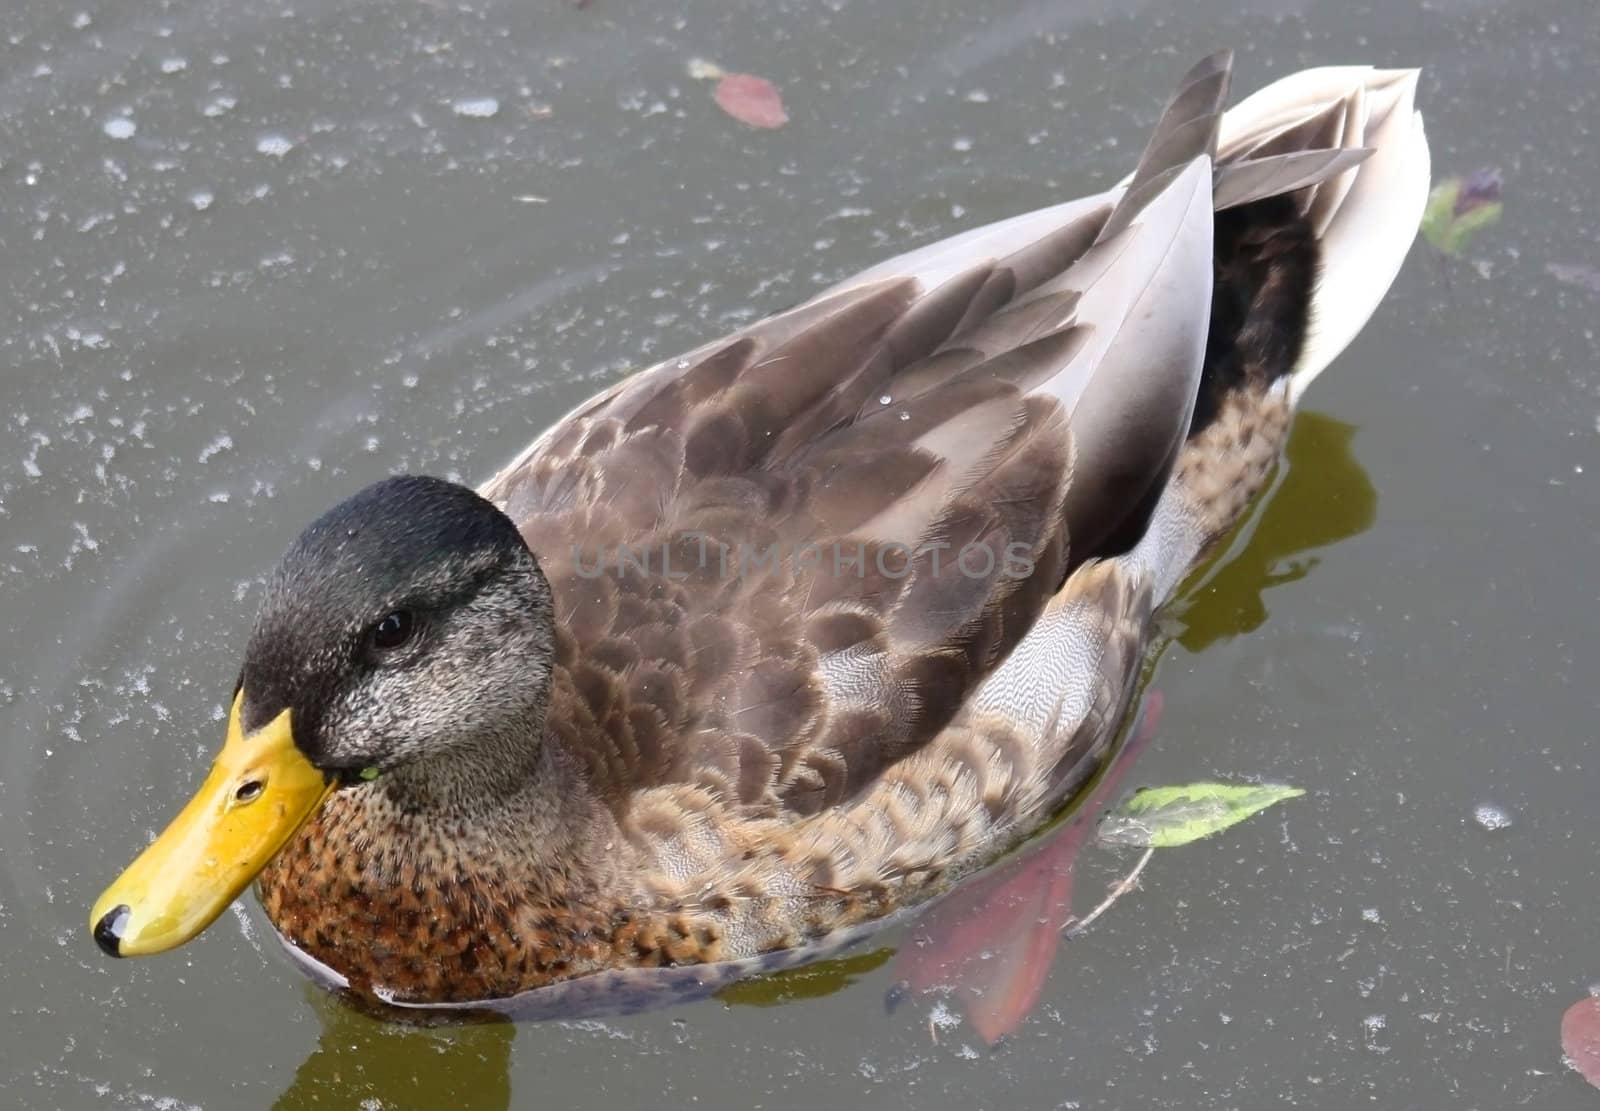 This image shows a portrait from a duck